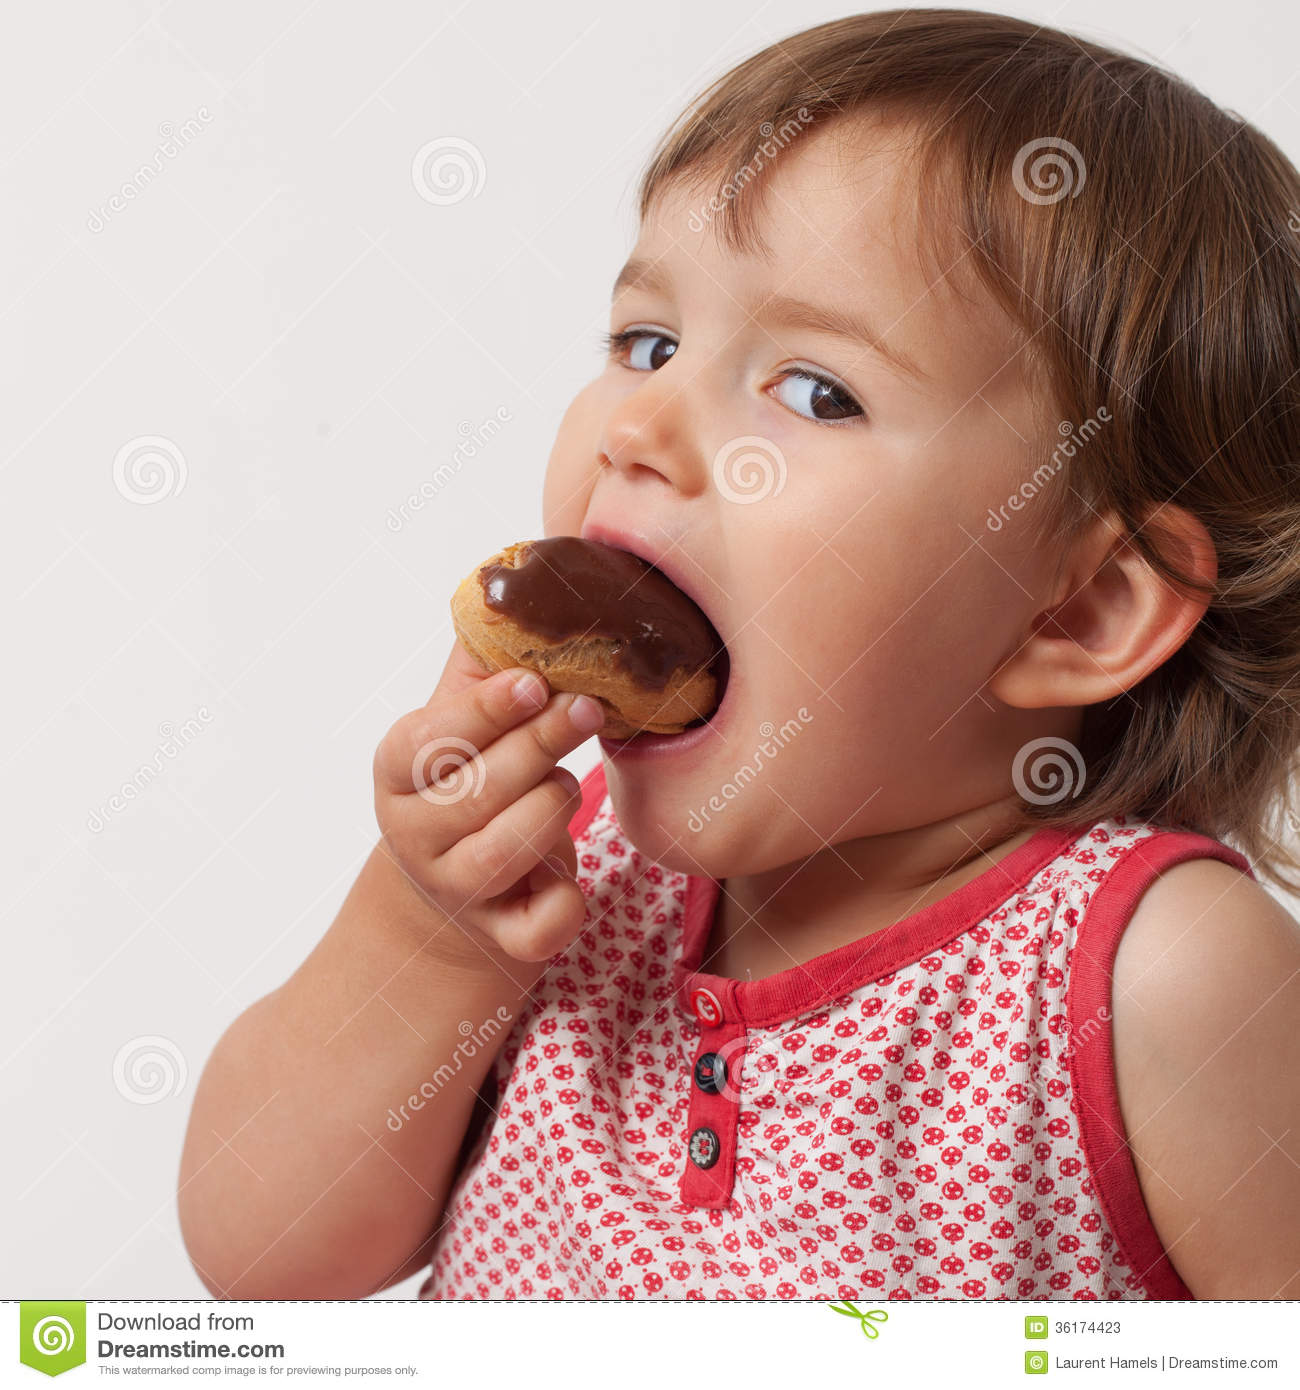 Year Old Baby Eating Sweets With Gluttony Stock Photos   Image